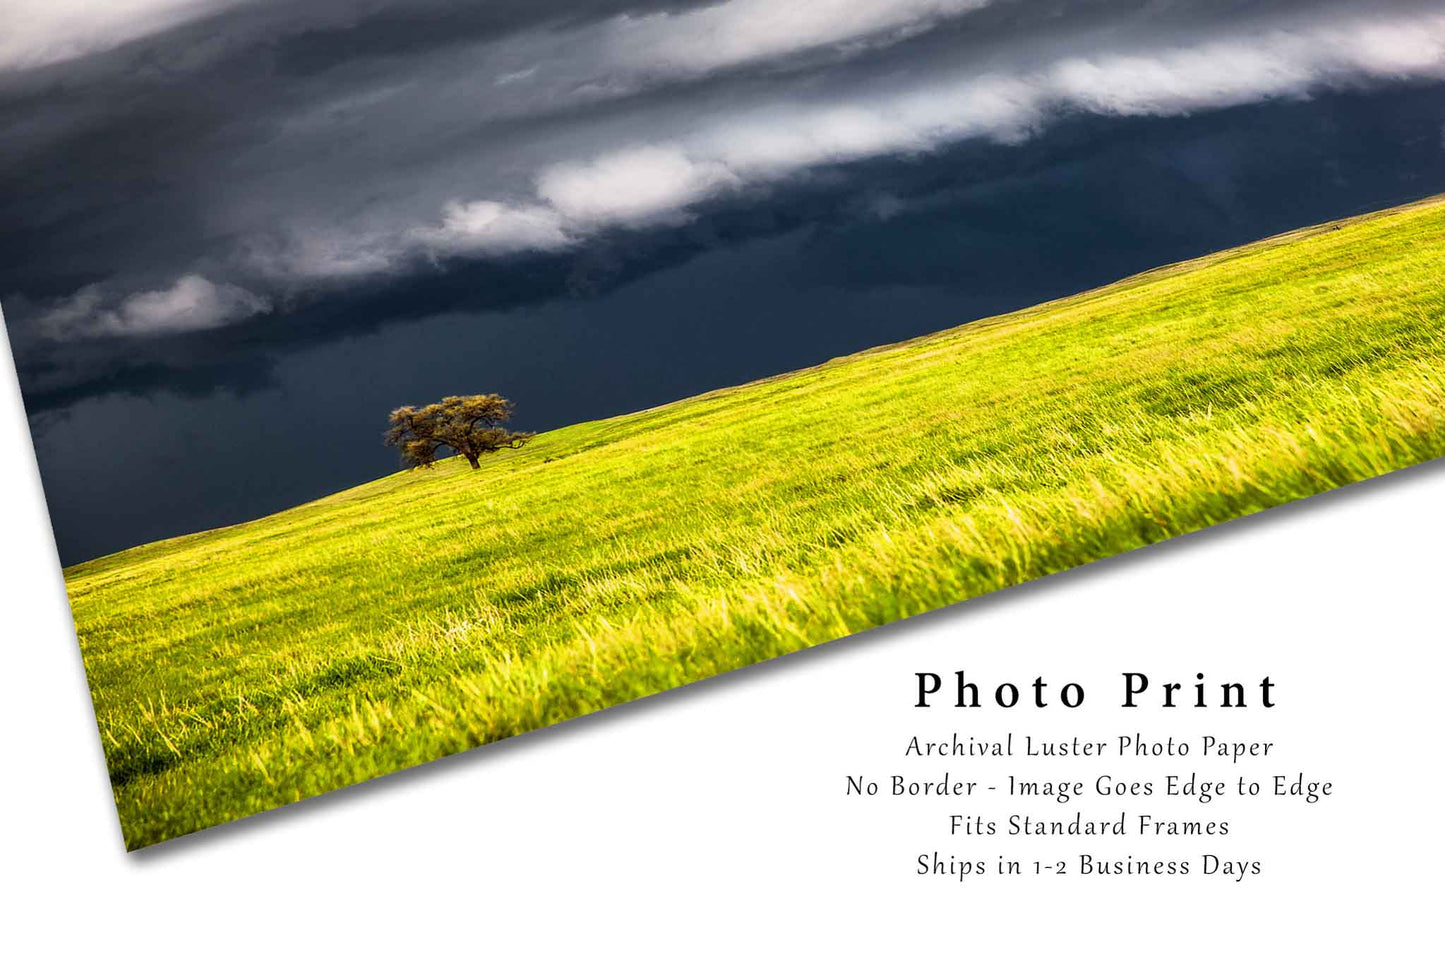 Storm Photography Print (Not Framed) Picture of Thunderstorm Passing Behind Lone Tree on Stormy Spring Day in Nebraska Prairie Wall Art Great Plains Decor